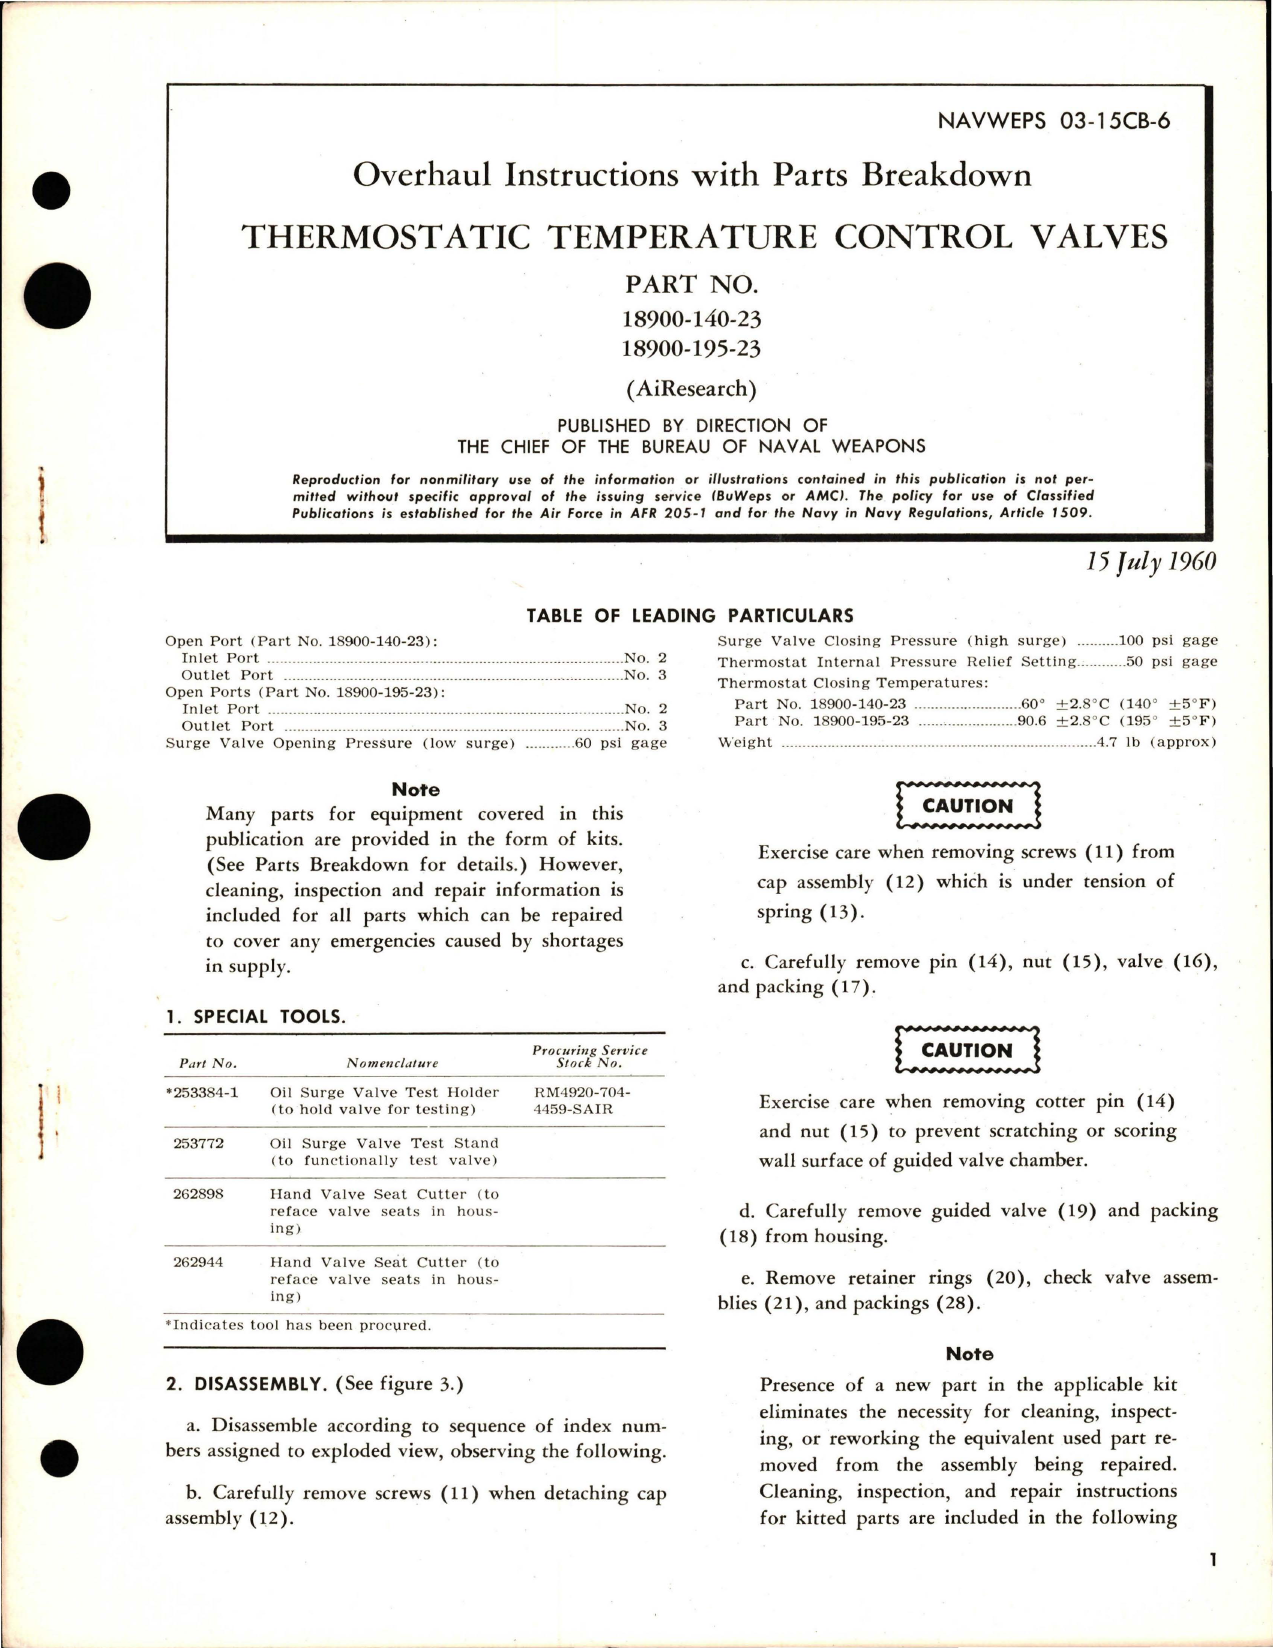 Sample page 1 from AirCorps Library document: Overhaul Instructions with Parts Breakdown for Thermostatic Temperature Control Valves - Parts 18900-140-23 and 18900-195-23